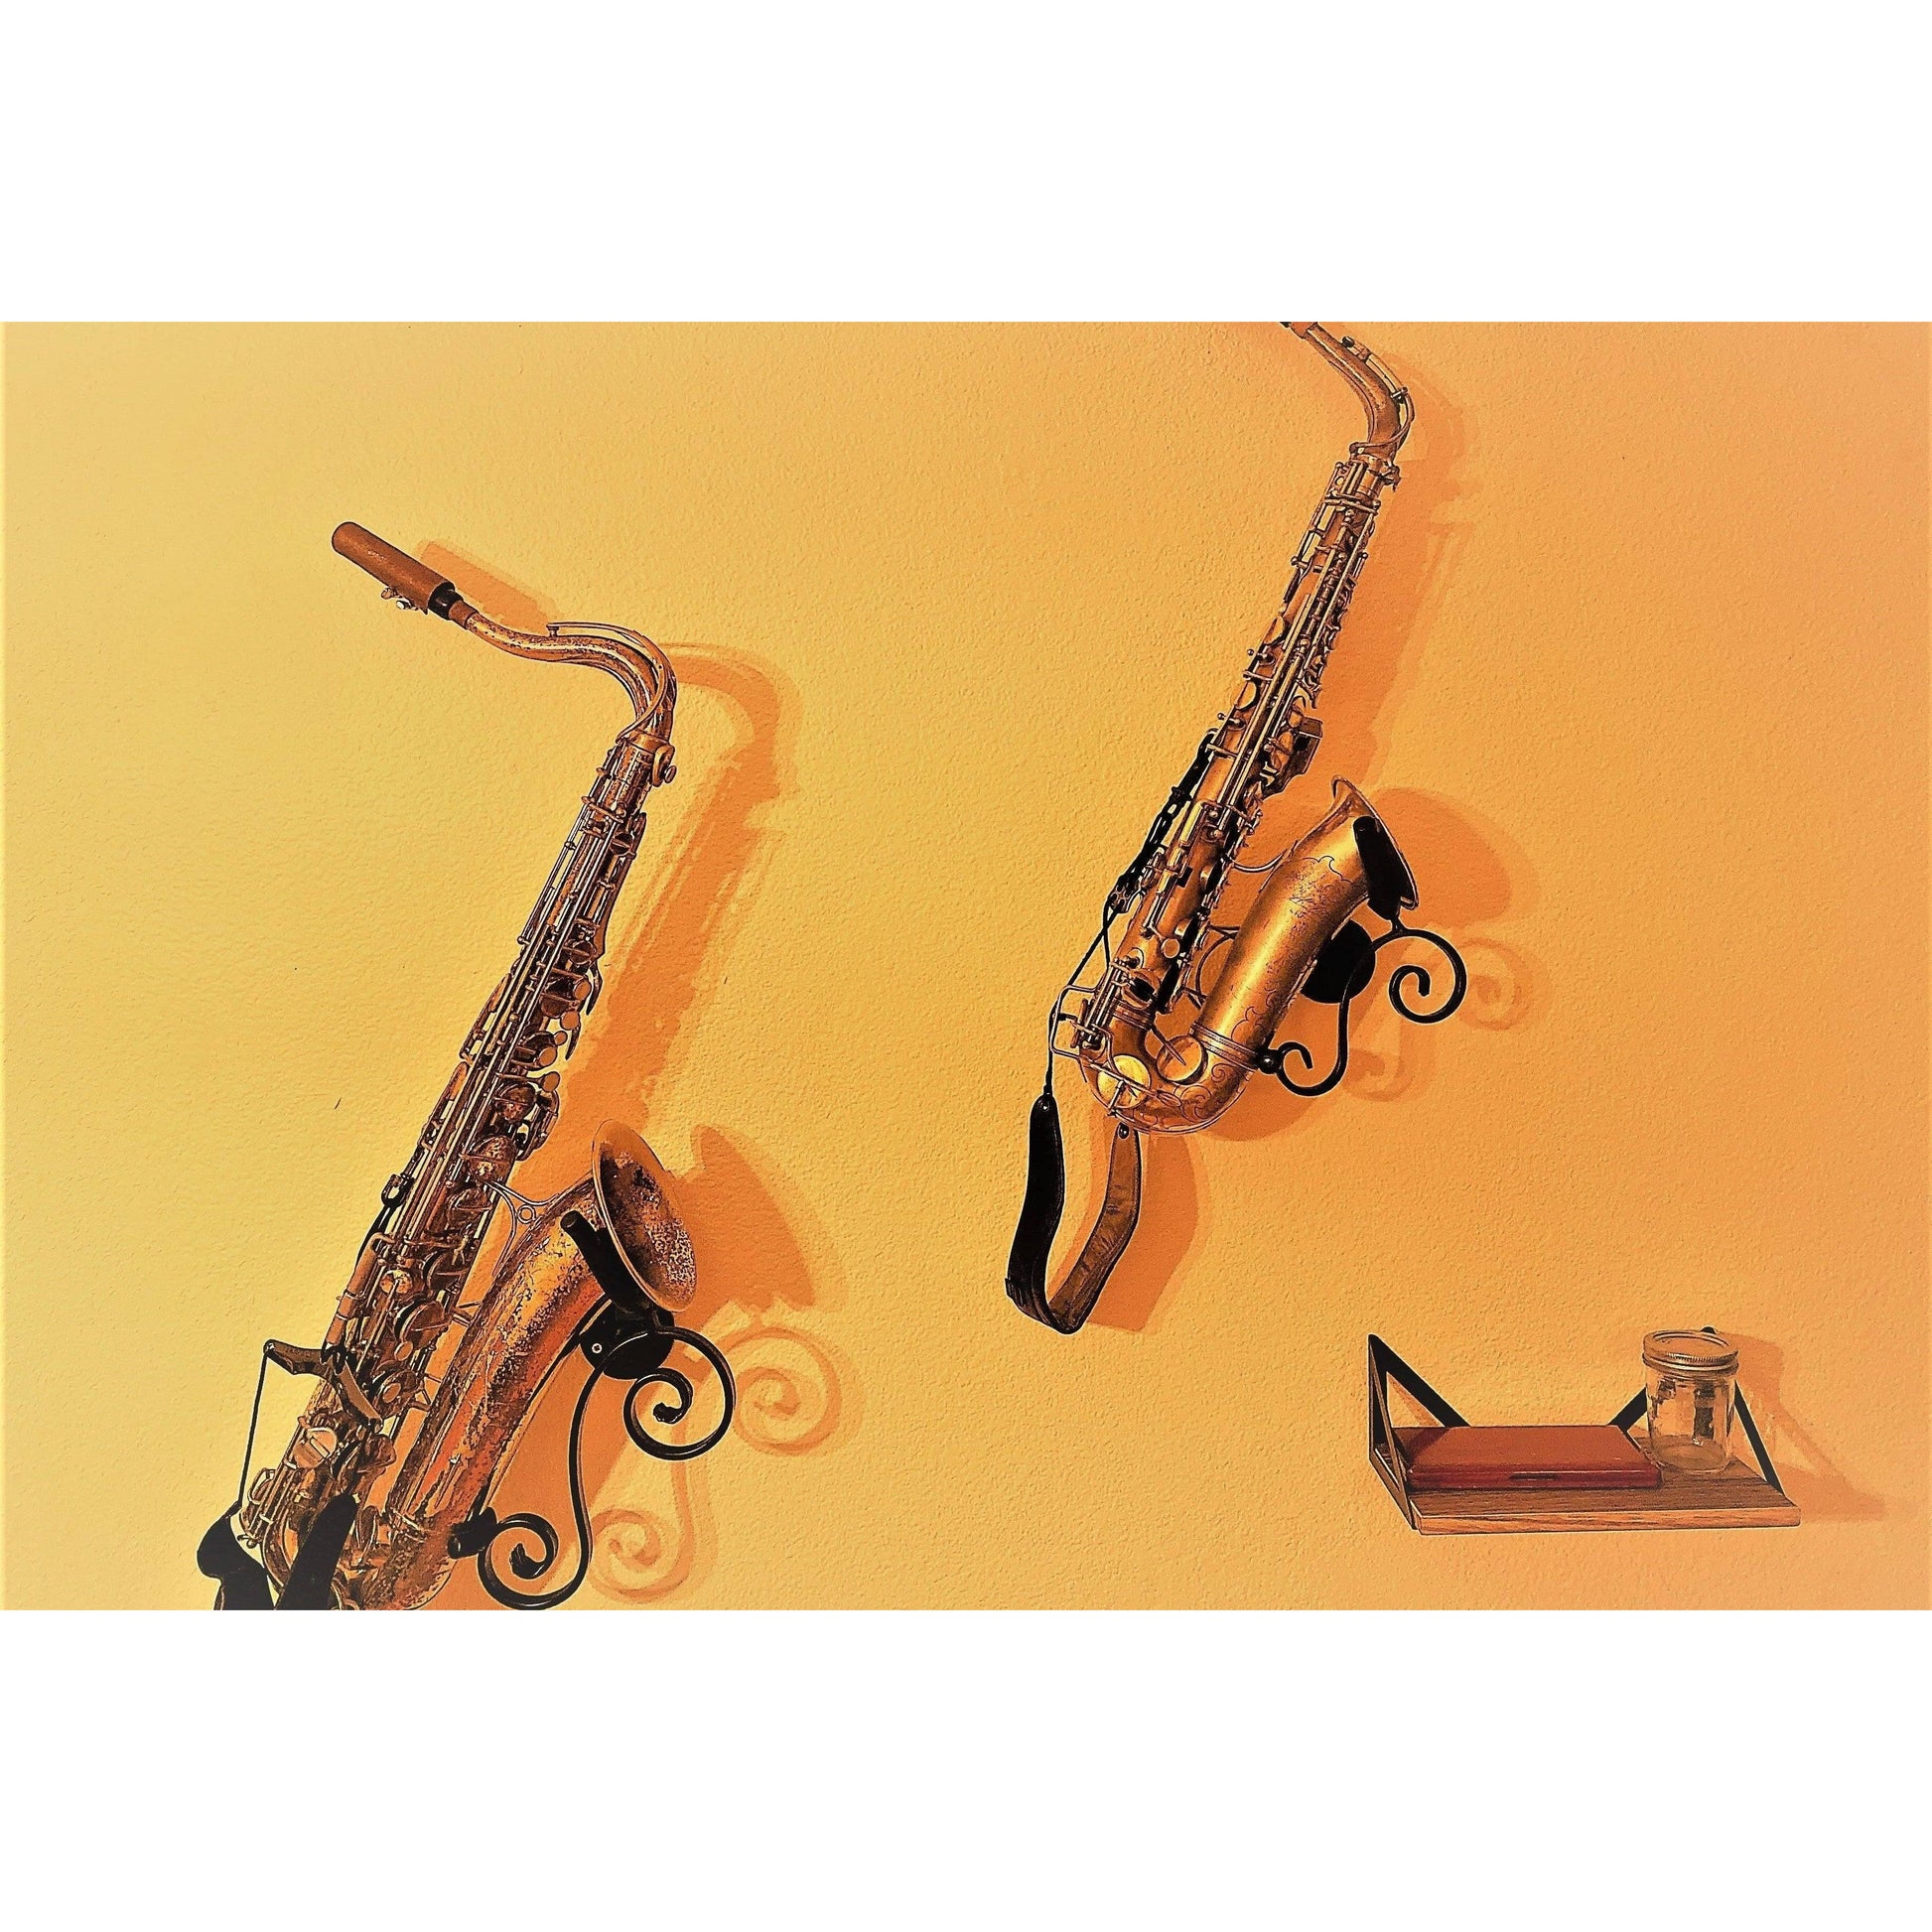 grainy customer made picture of two saxophones in bespoke saxophone  stands made by Locoparasaxo on yellow wall